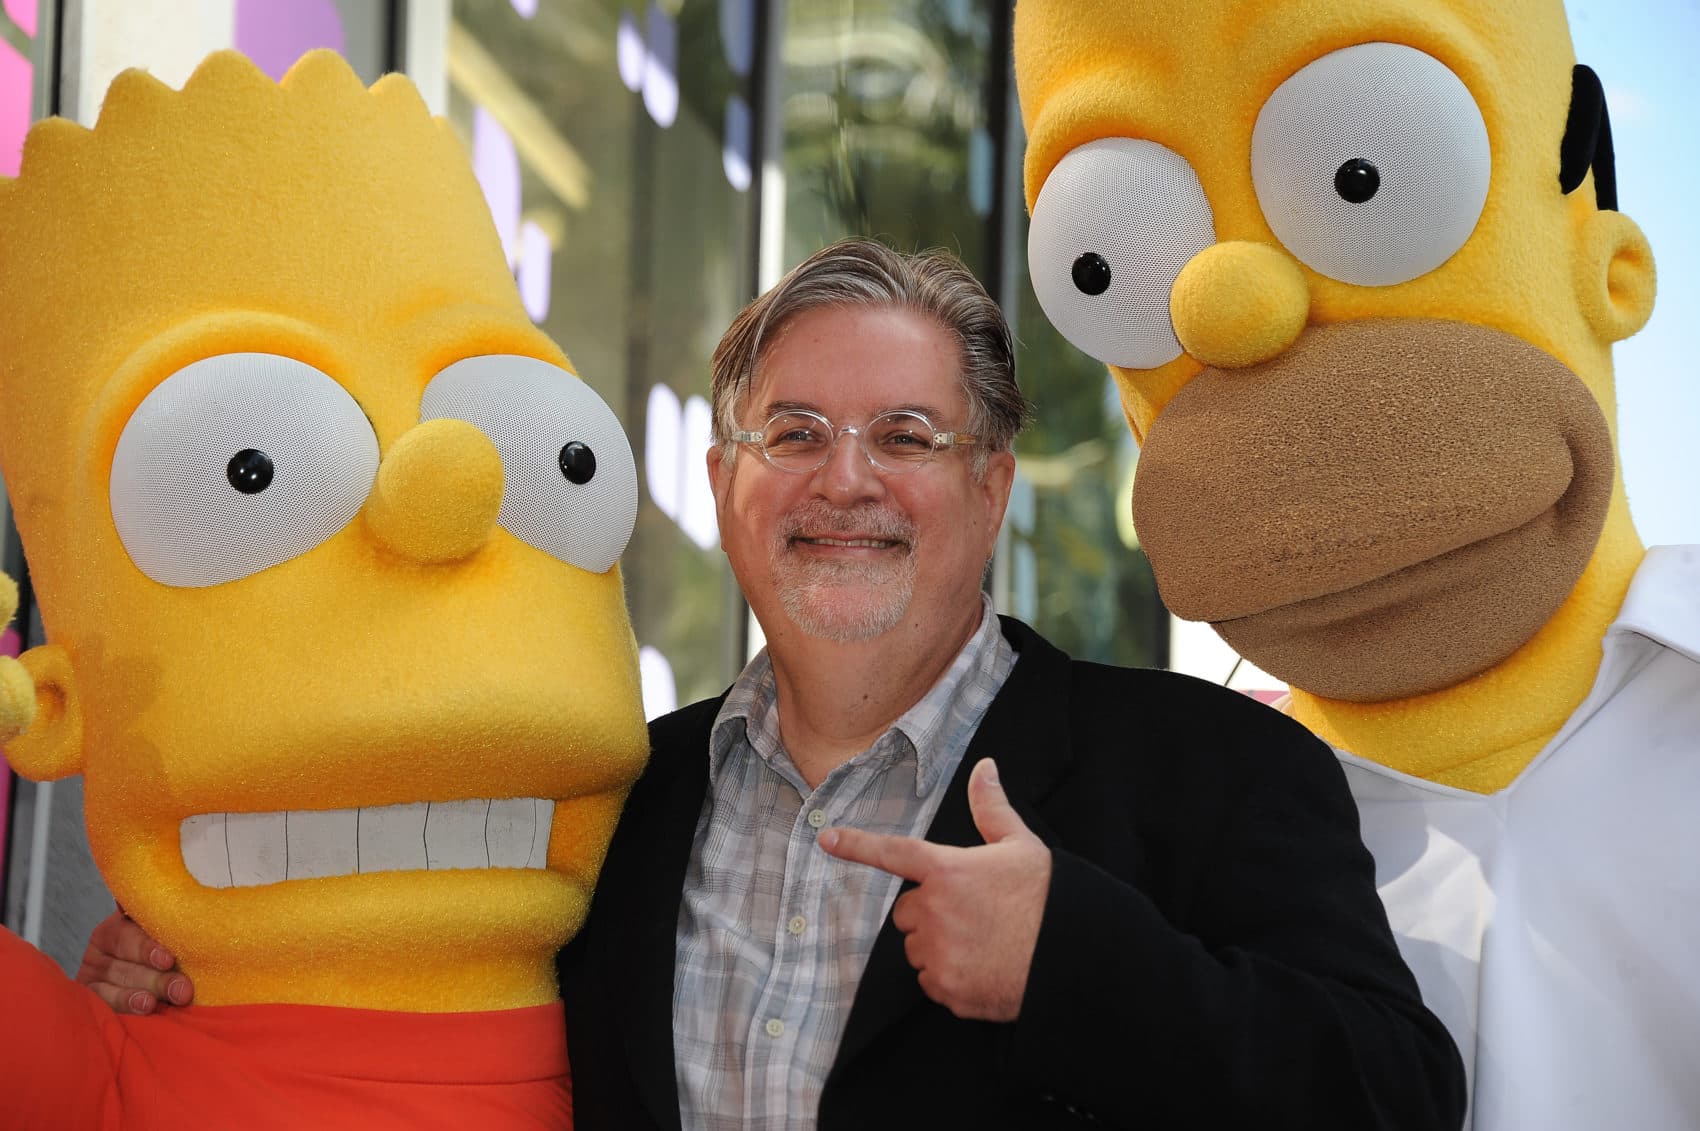 Cartoonist Matt Groening, creator of &quot;The Simpsons,&quot; poses with his characters Bart (left) and Homer Simpson. &quot;The Simpsons&quot; celebrates its 30th anniversary this year. (Robyn Beck/AFP/Getty Images)